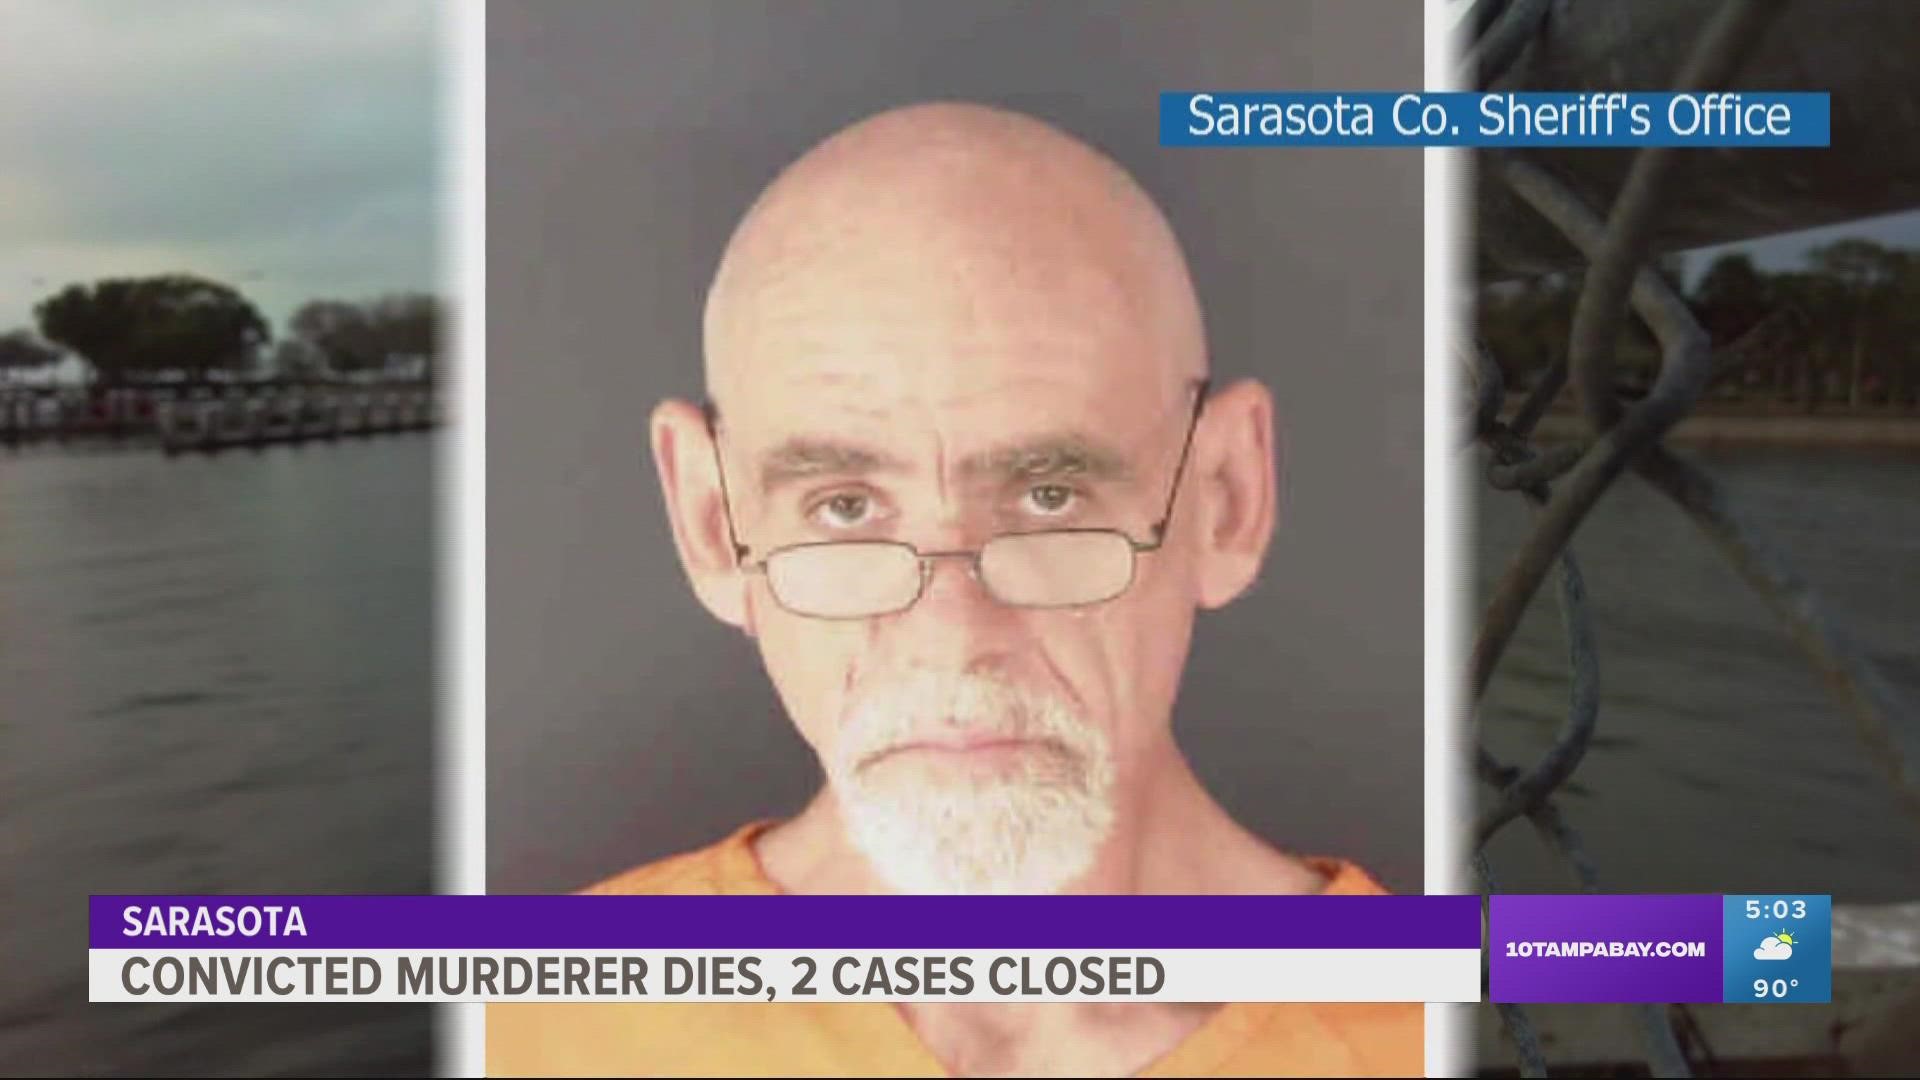 Authorities say a murder charge was being written for the death of another woman against William Devonshire, but that and another case will not continue.